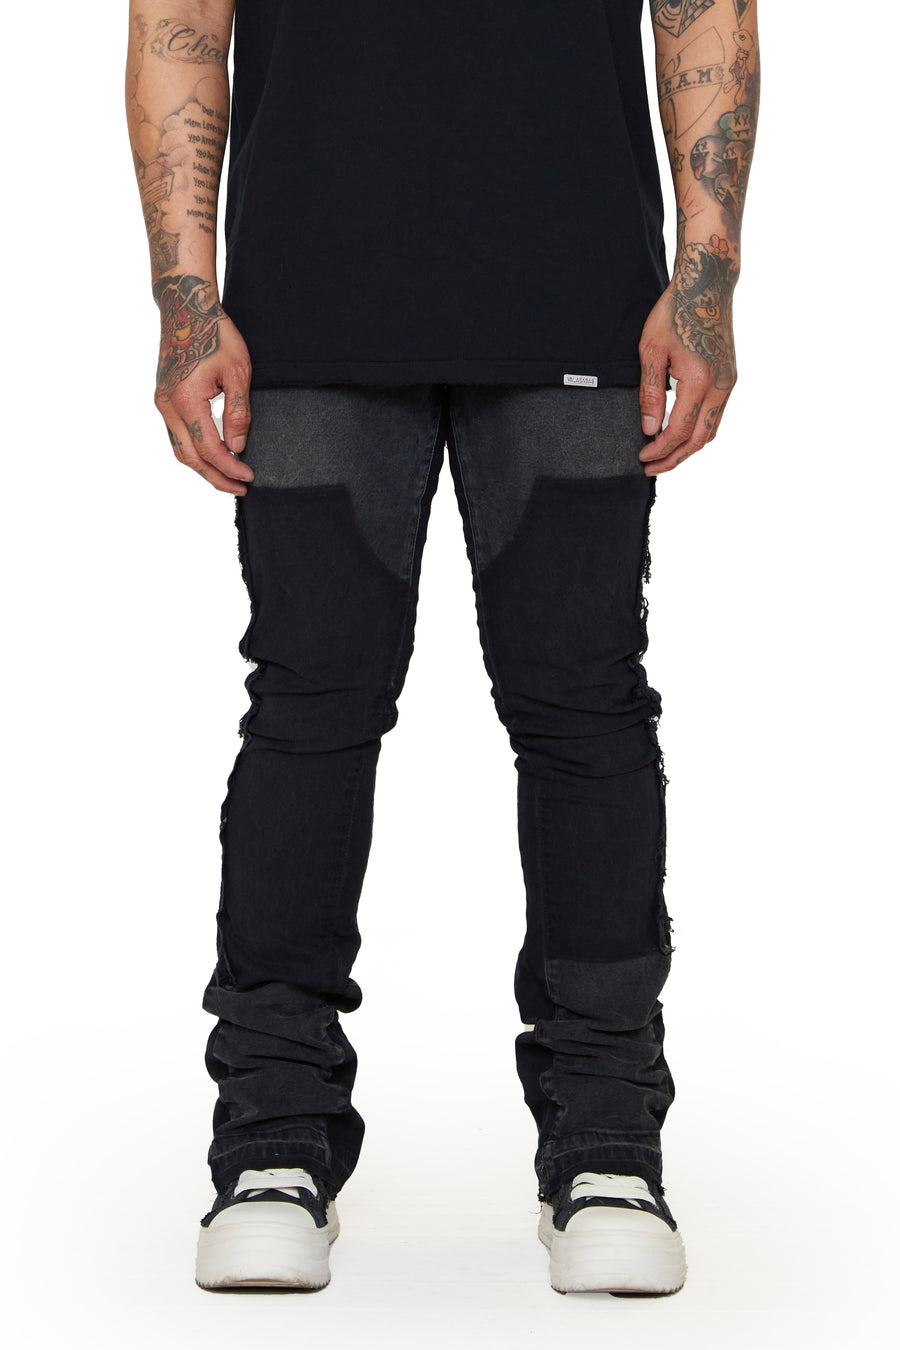 ‚ÄúALPHA" BLACK WASHED STACKED FLARE JEAN